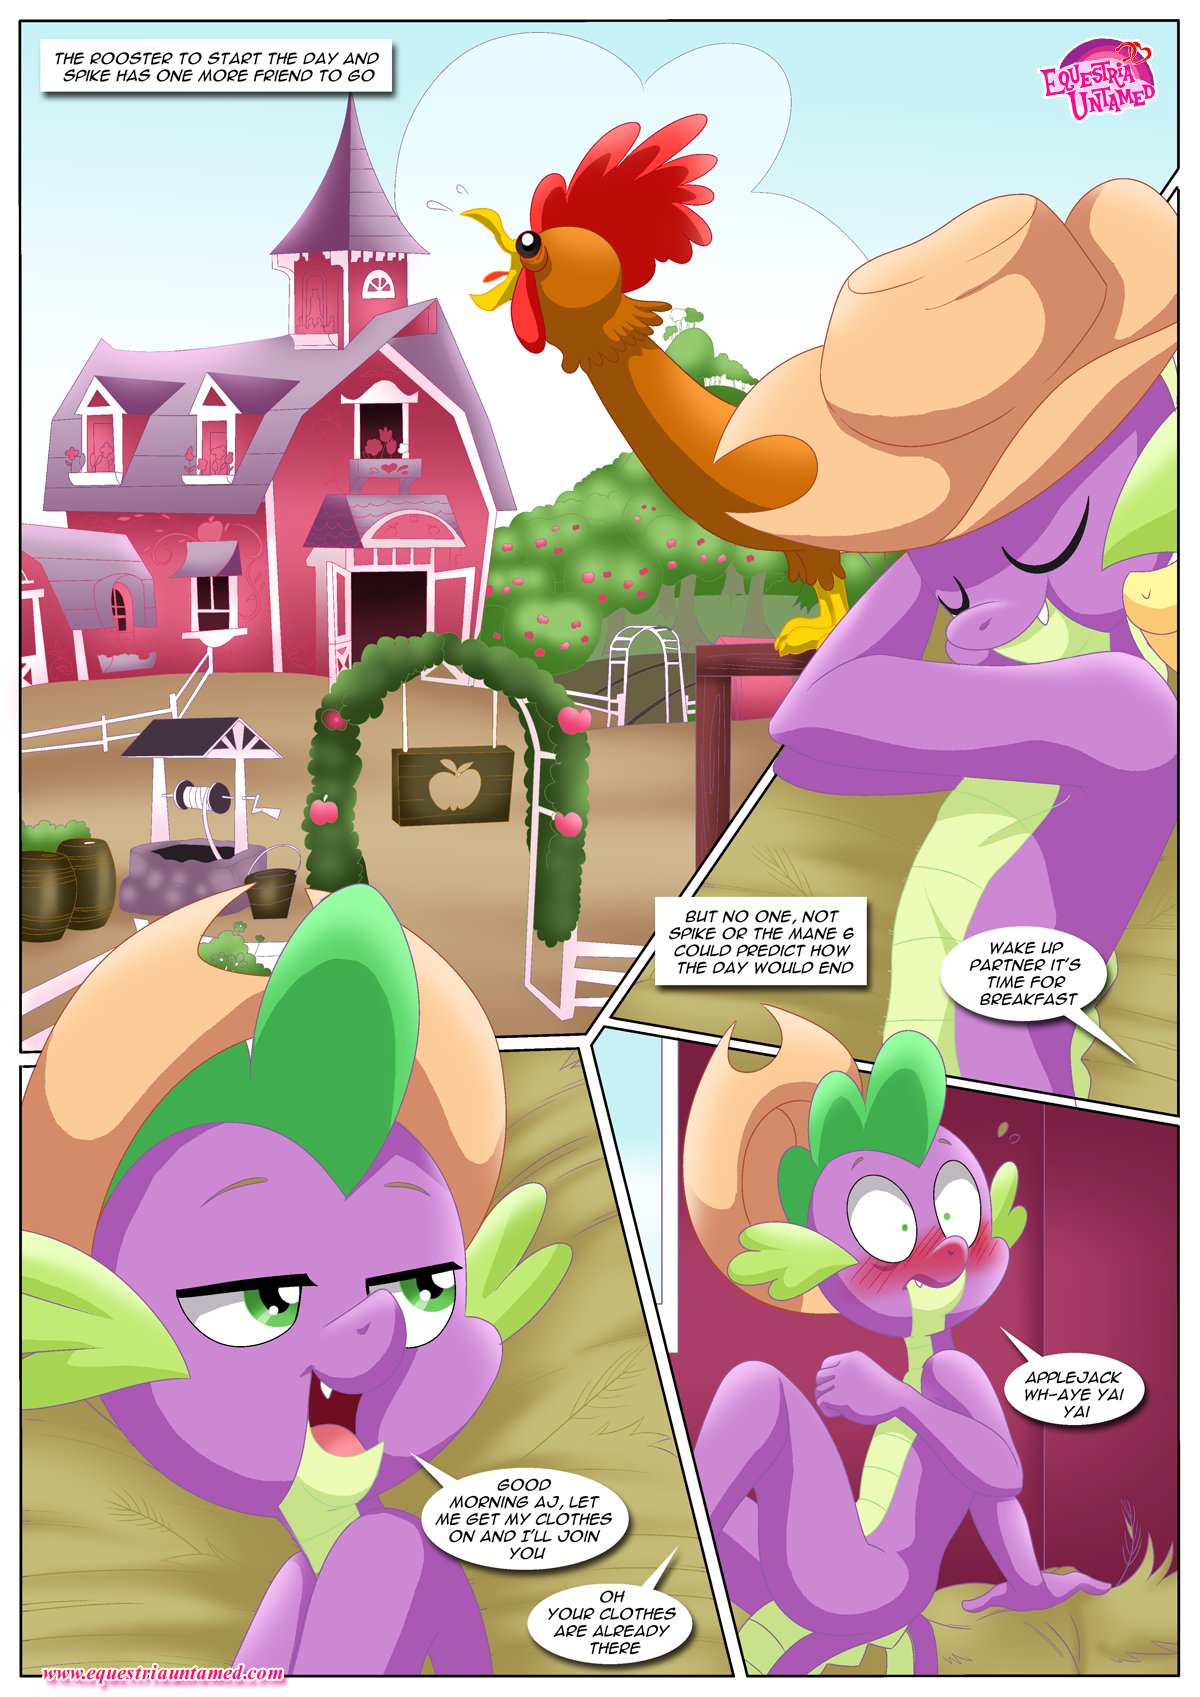 Porky recomended pinkie mlp